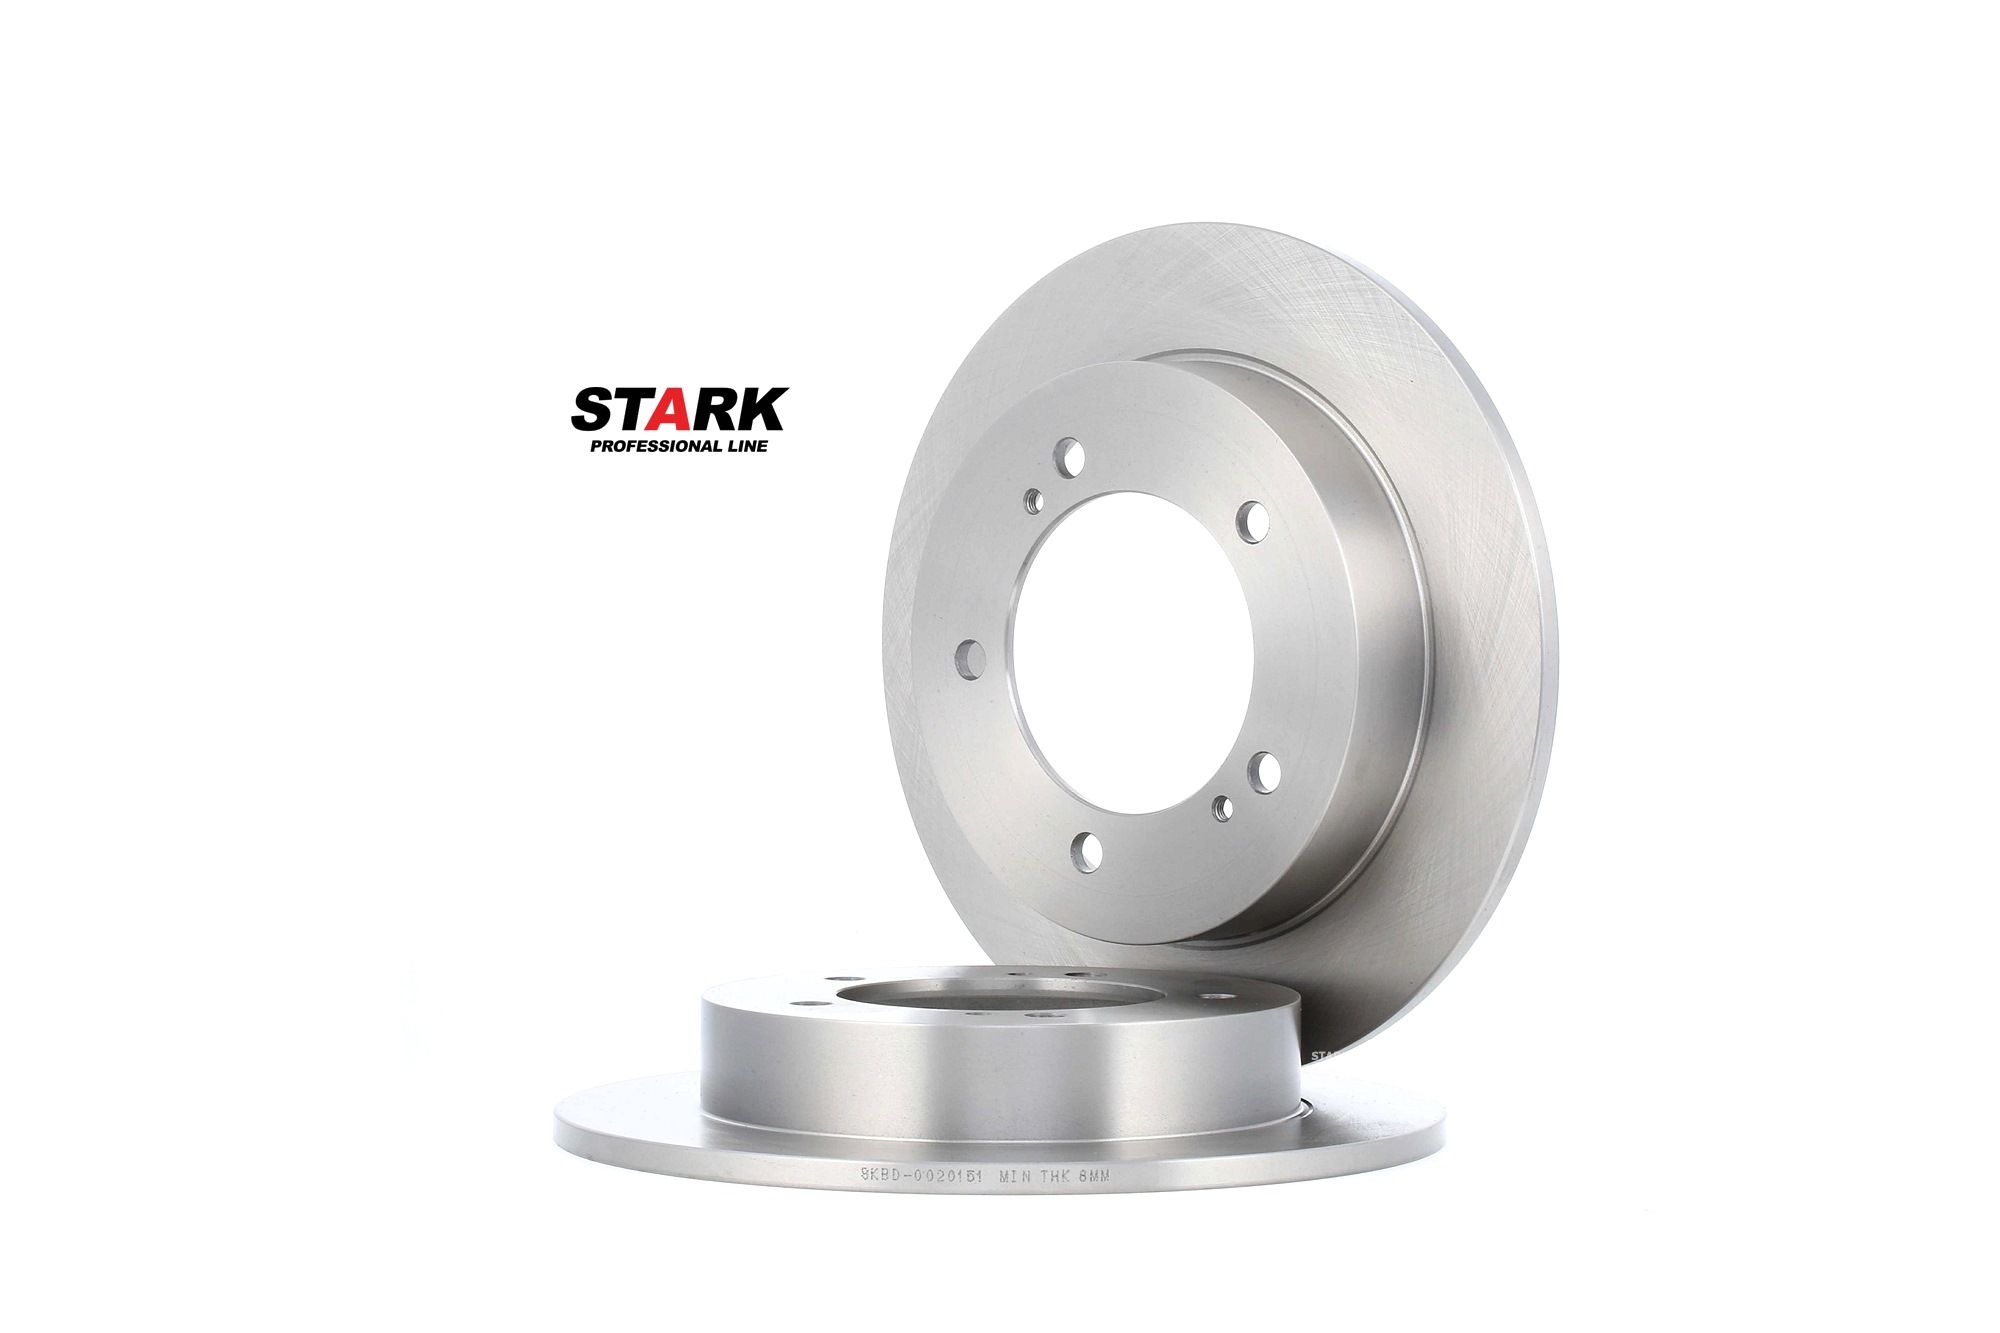 STARK SKBD-0020151 Brake disc Front Axle, 290x10mm, 5/7x140, solid, Uncoated